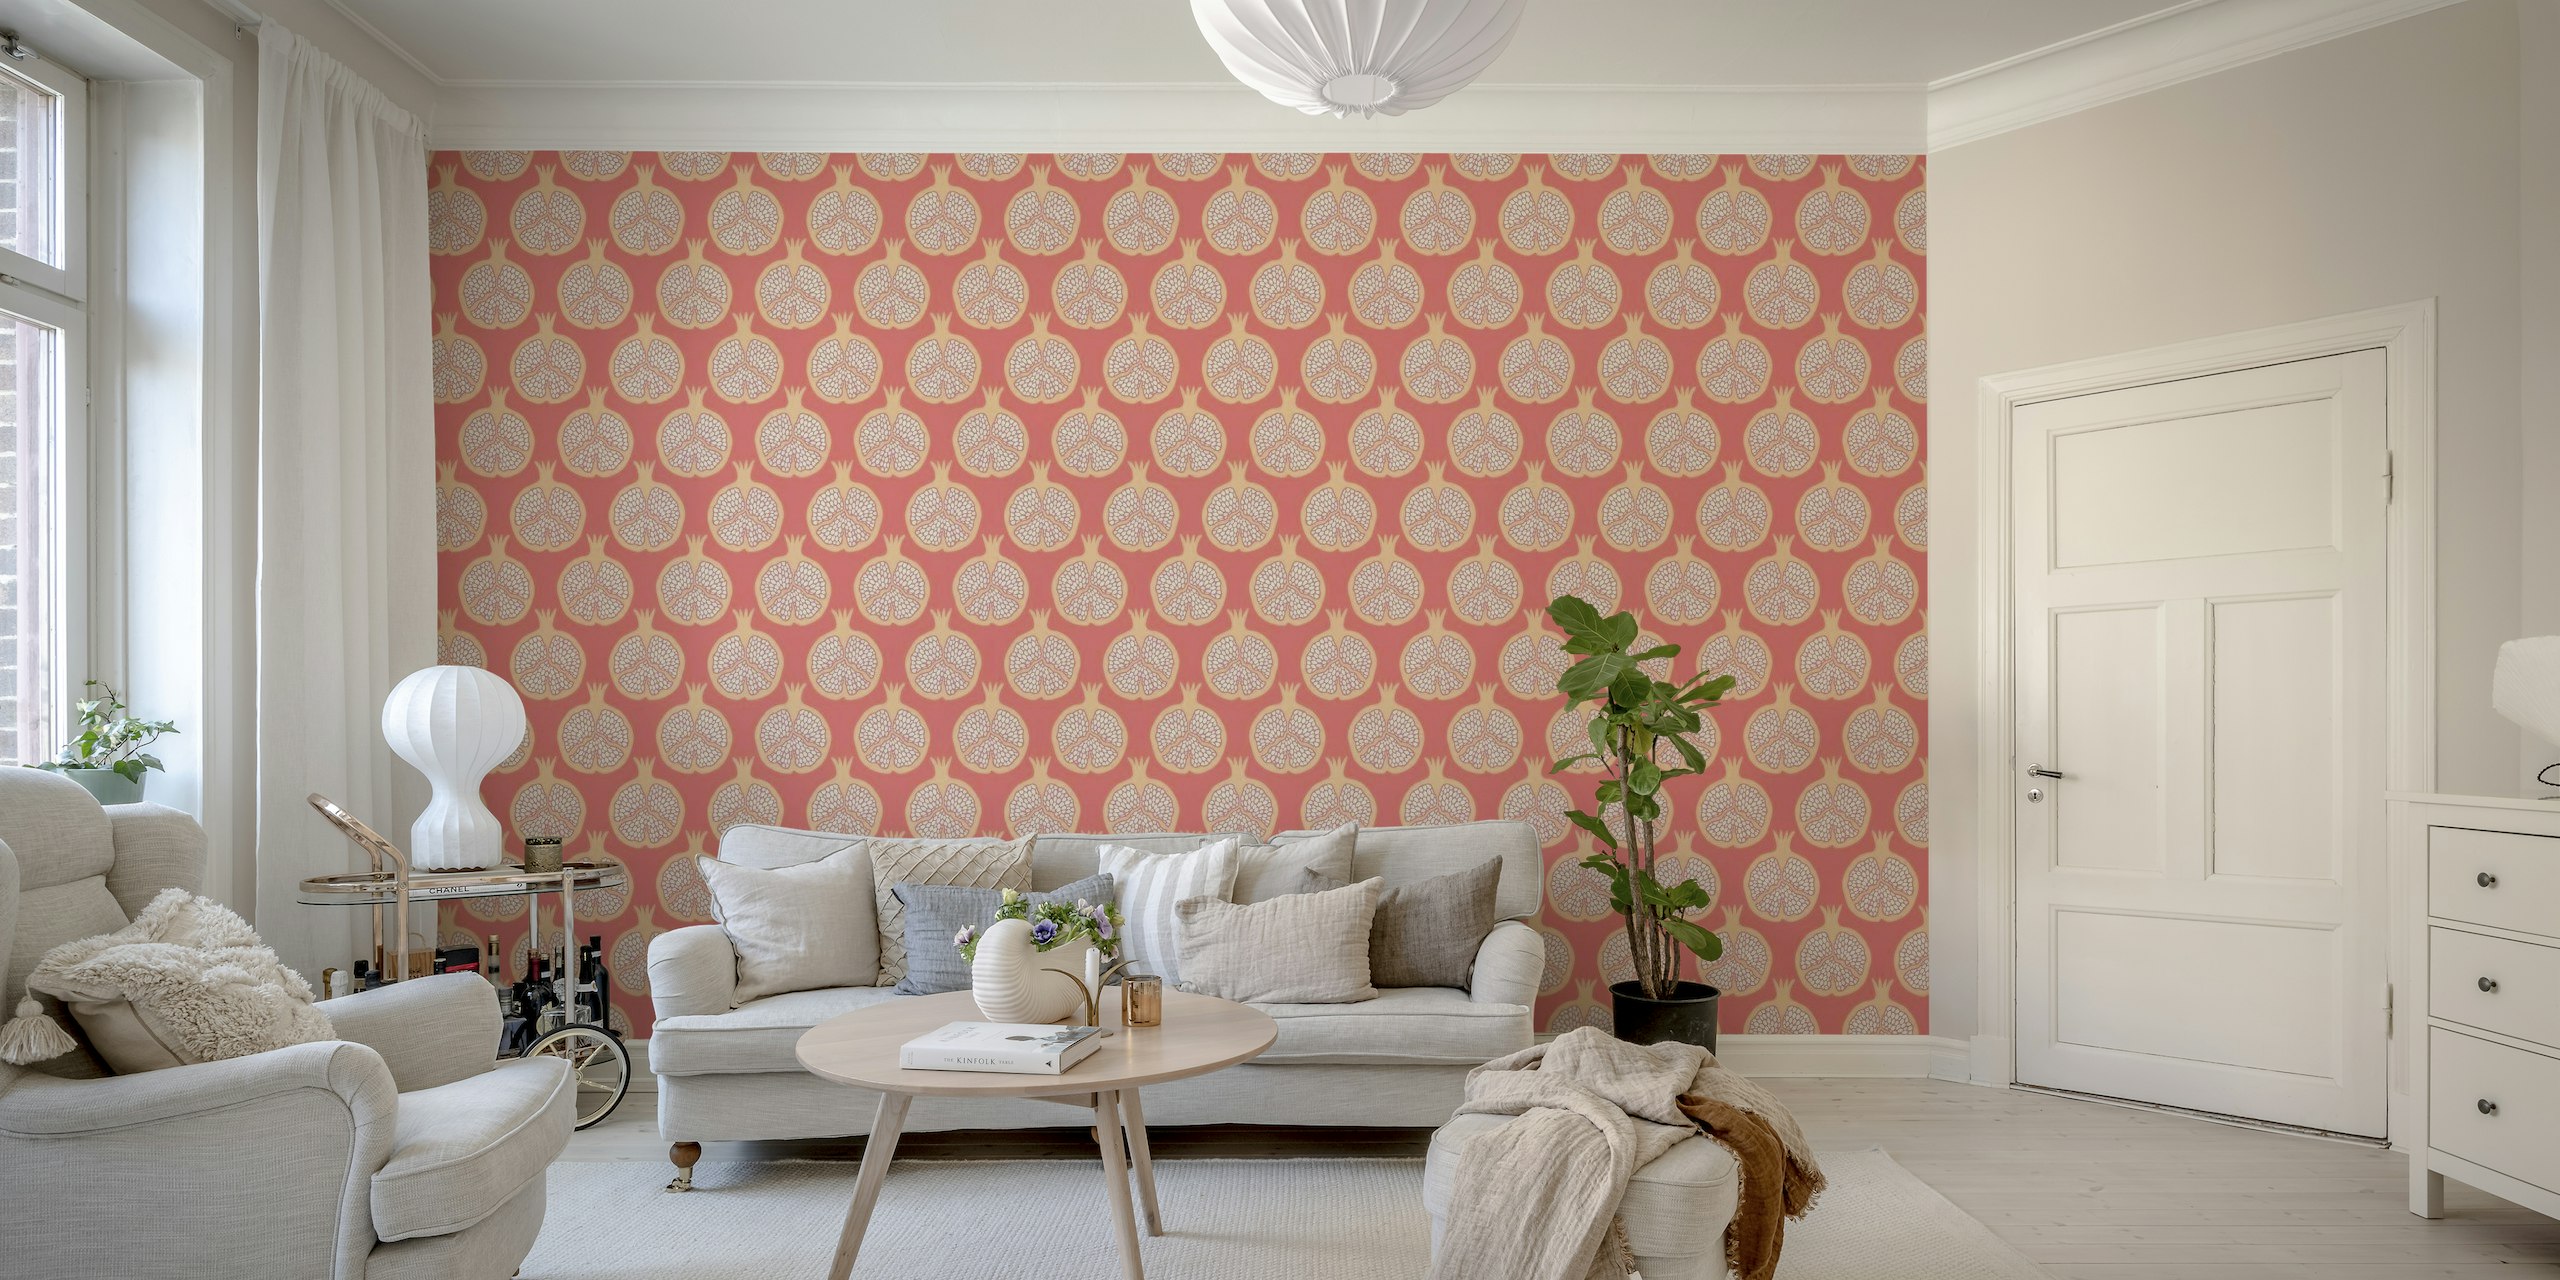 Pomegranate pattern wall mural with ripe pomegranates on a peach background